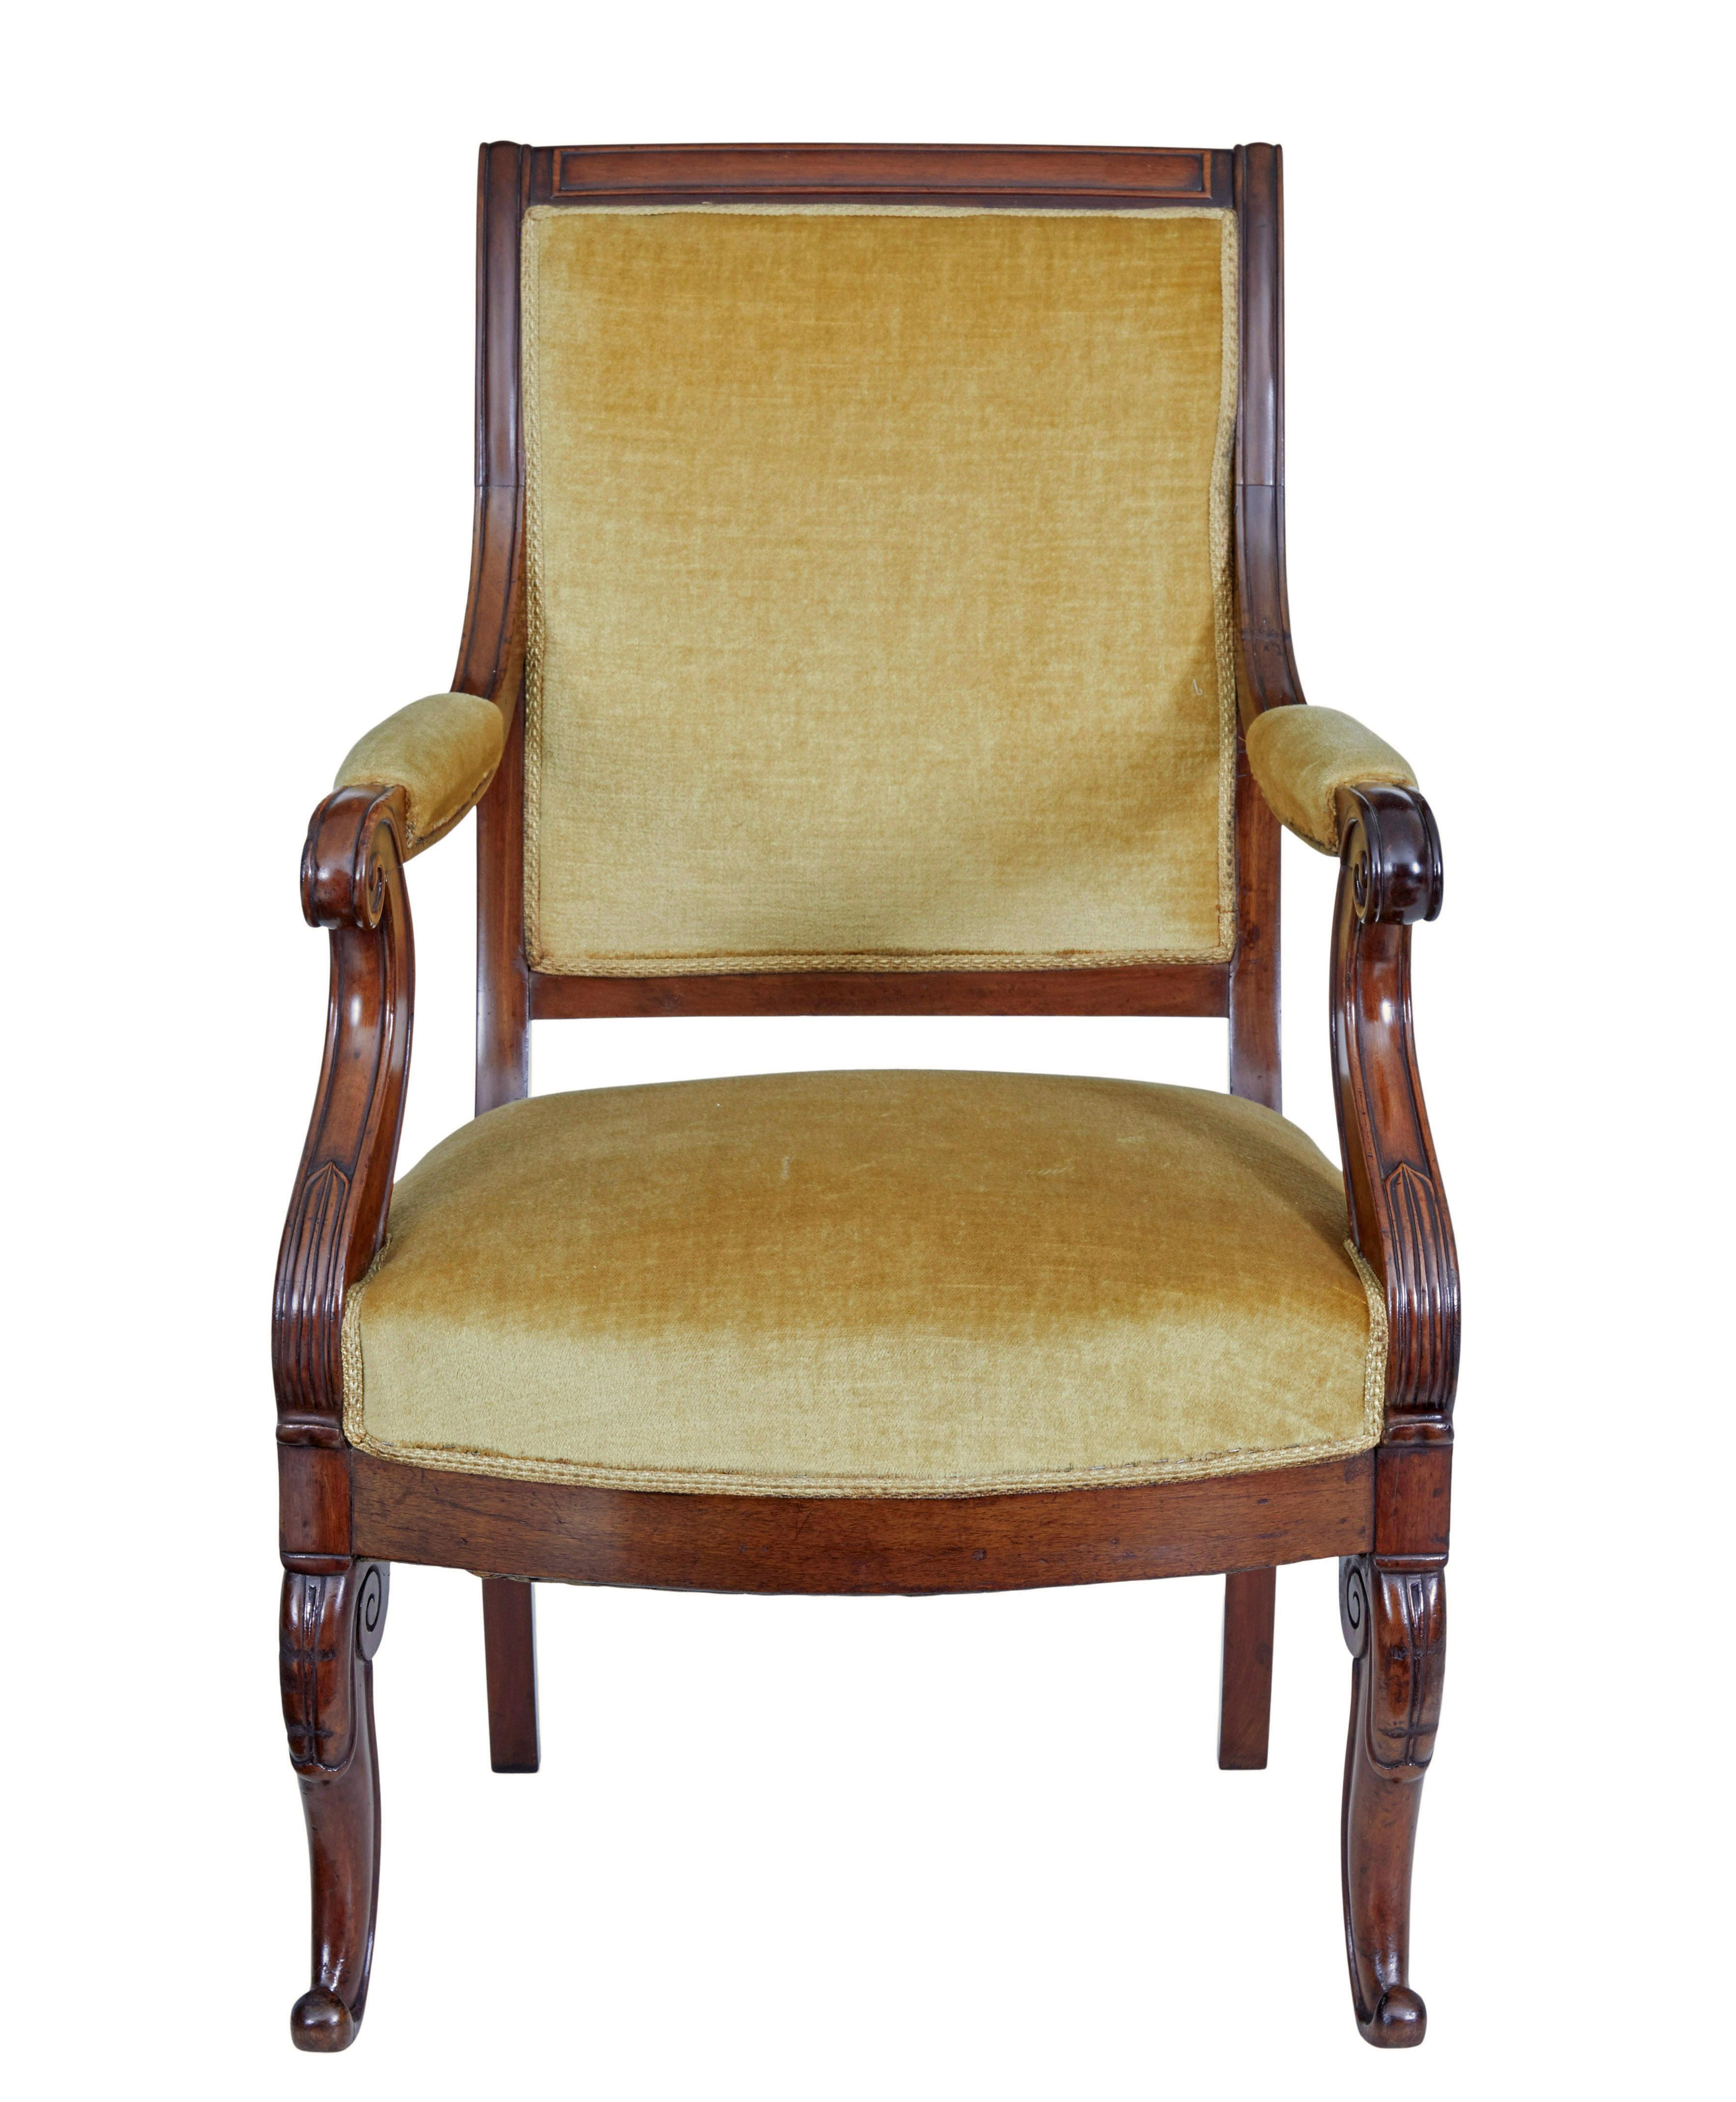 19th century French empire mahogany armchair For Sale 1